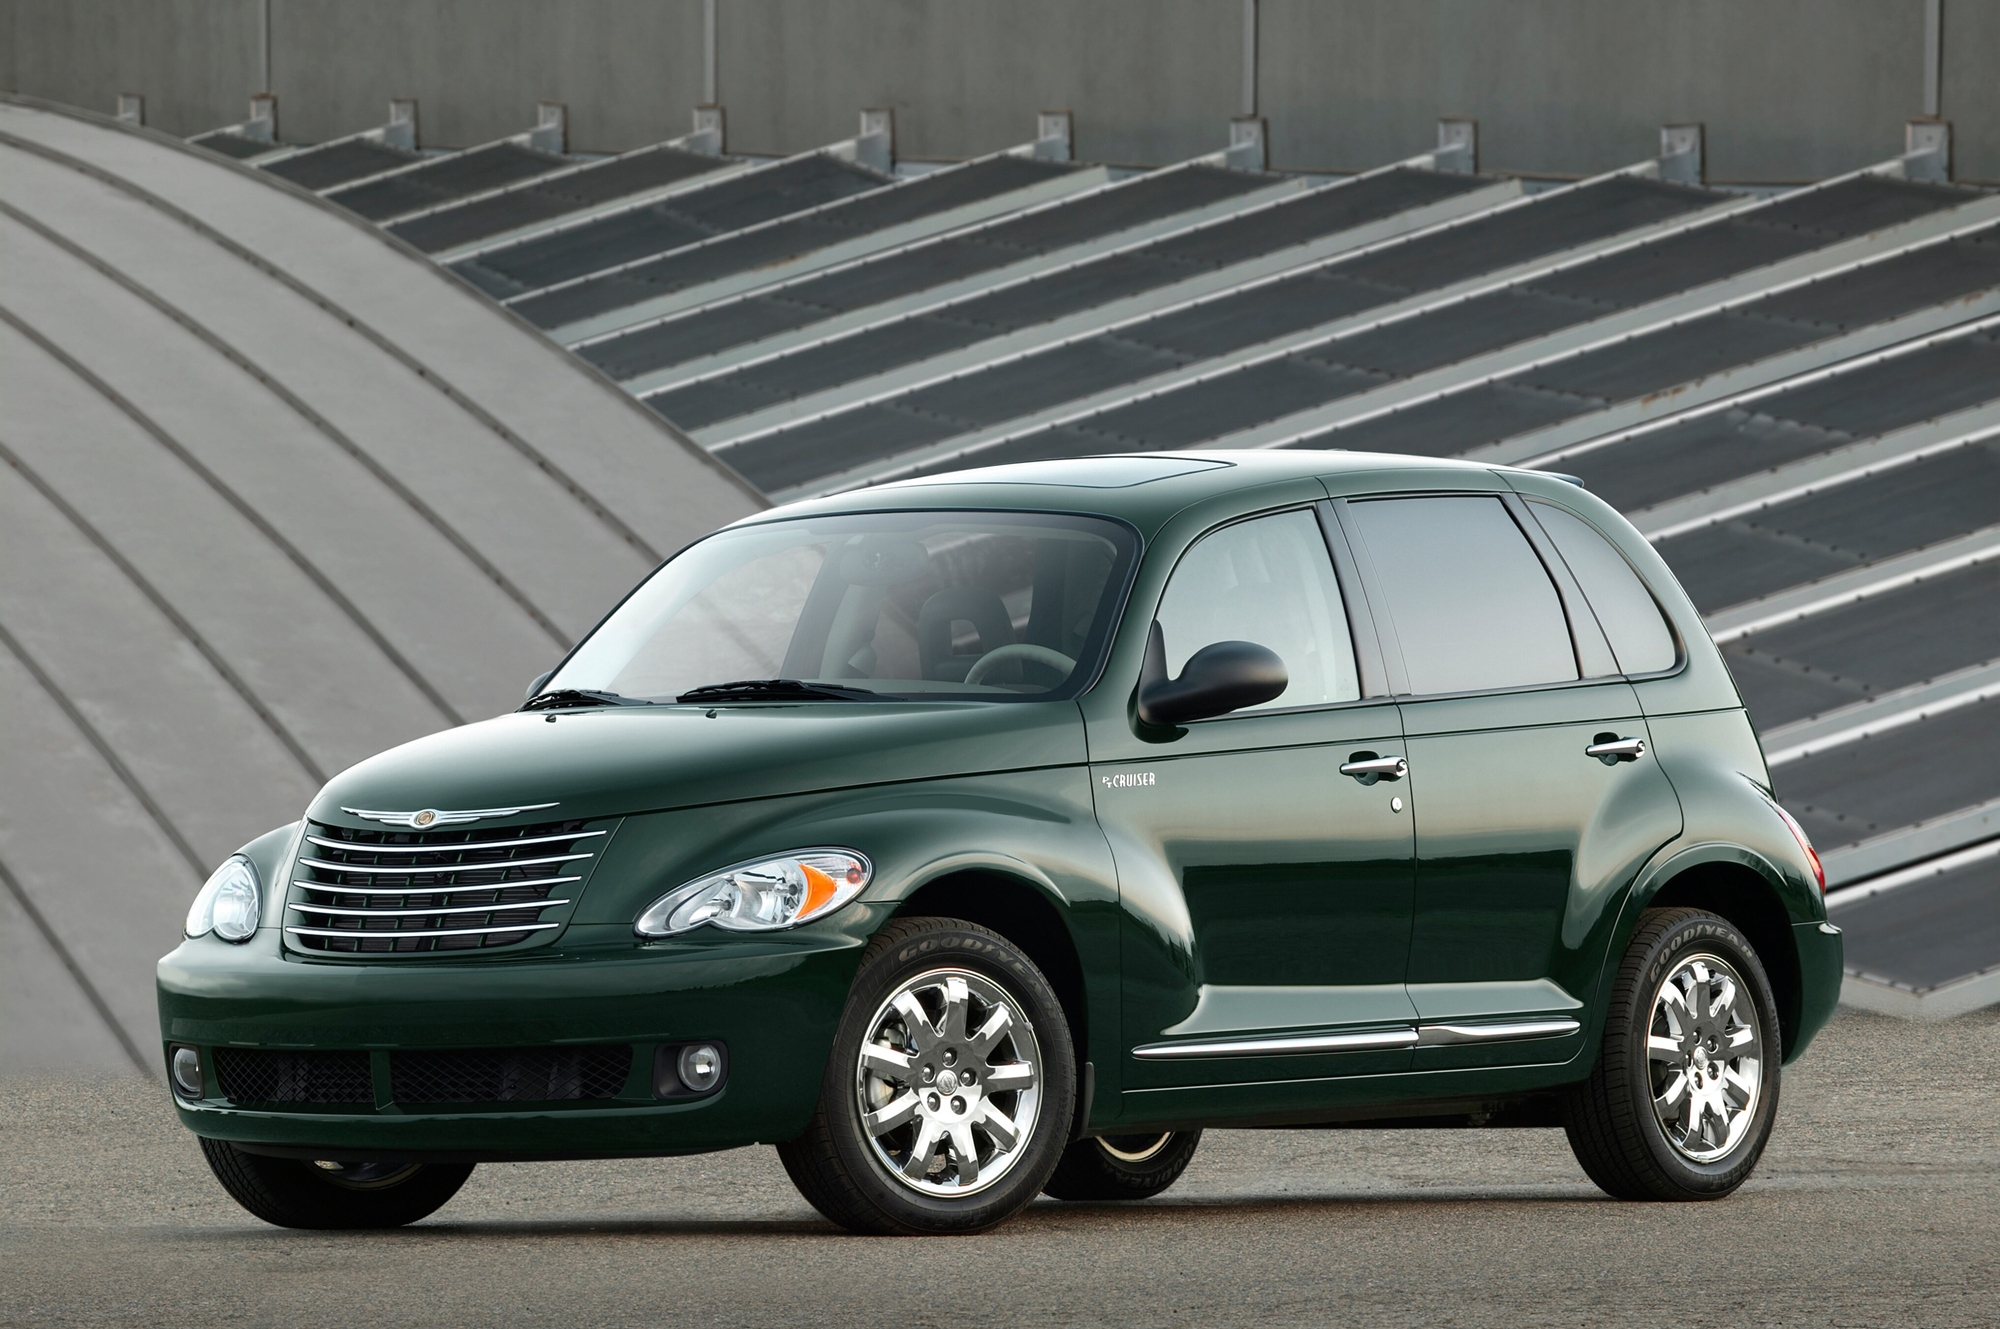 Chrysler PT Cruiser Classic Wagon Full Specs, Features and Price